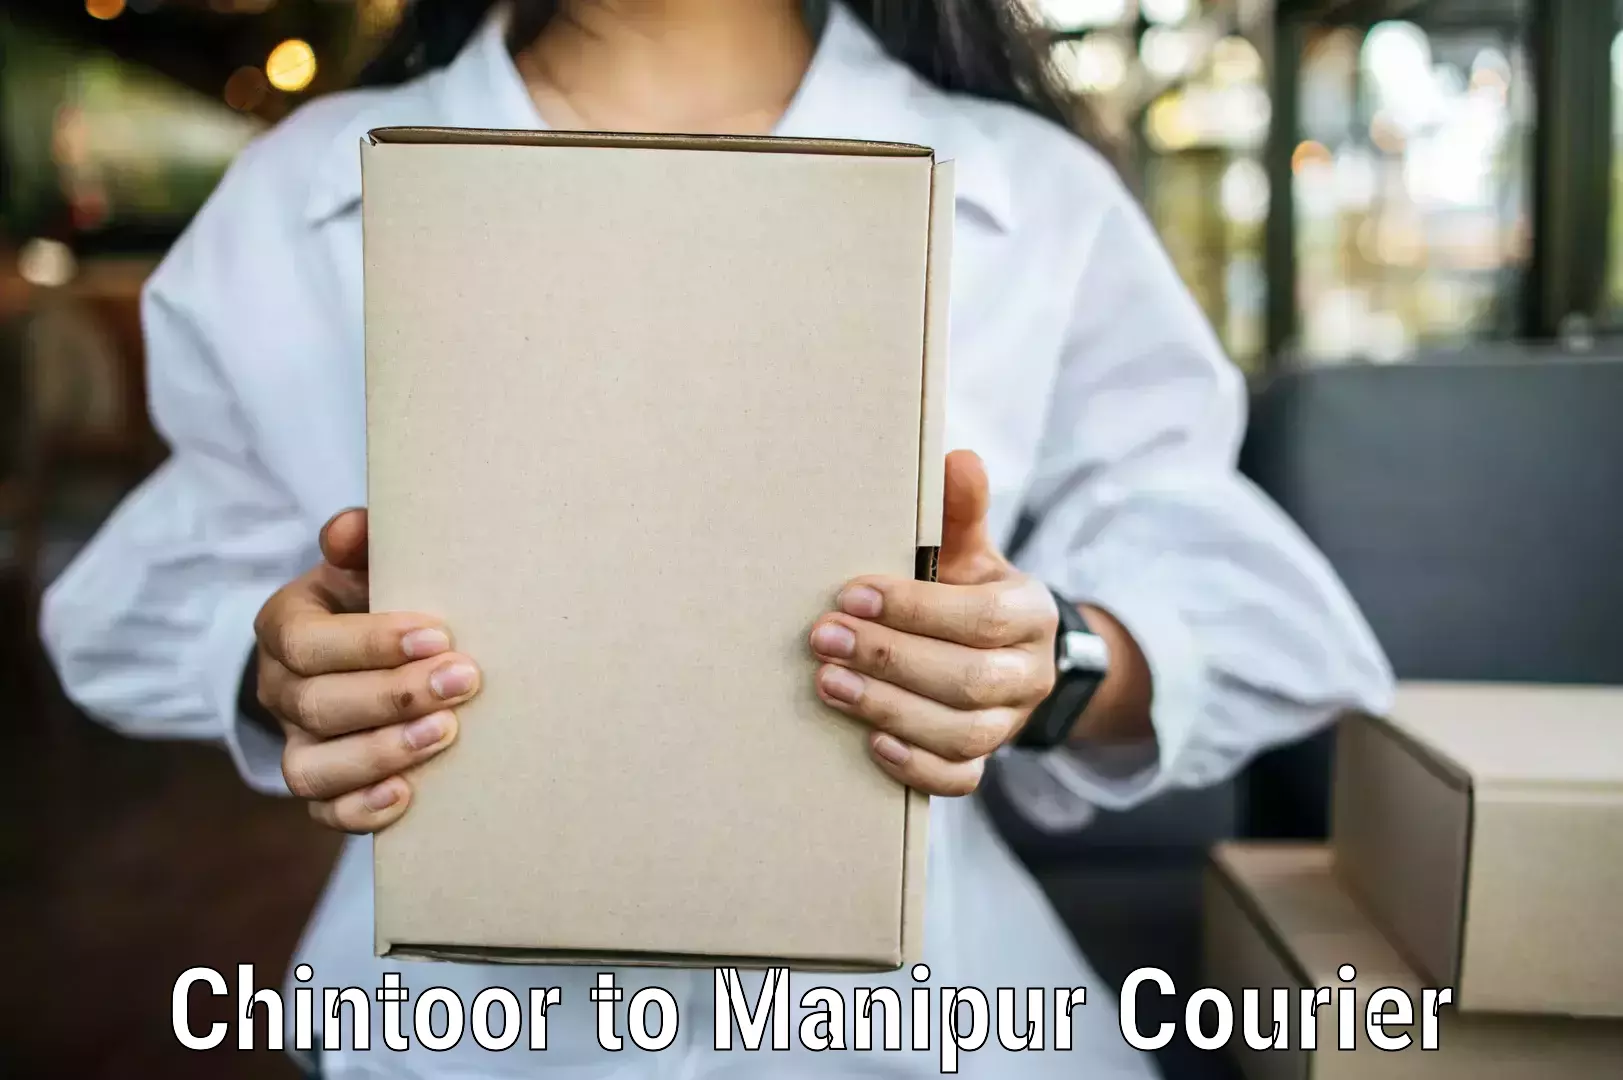 Courier service comparison Chintoor to Imphal